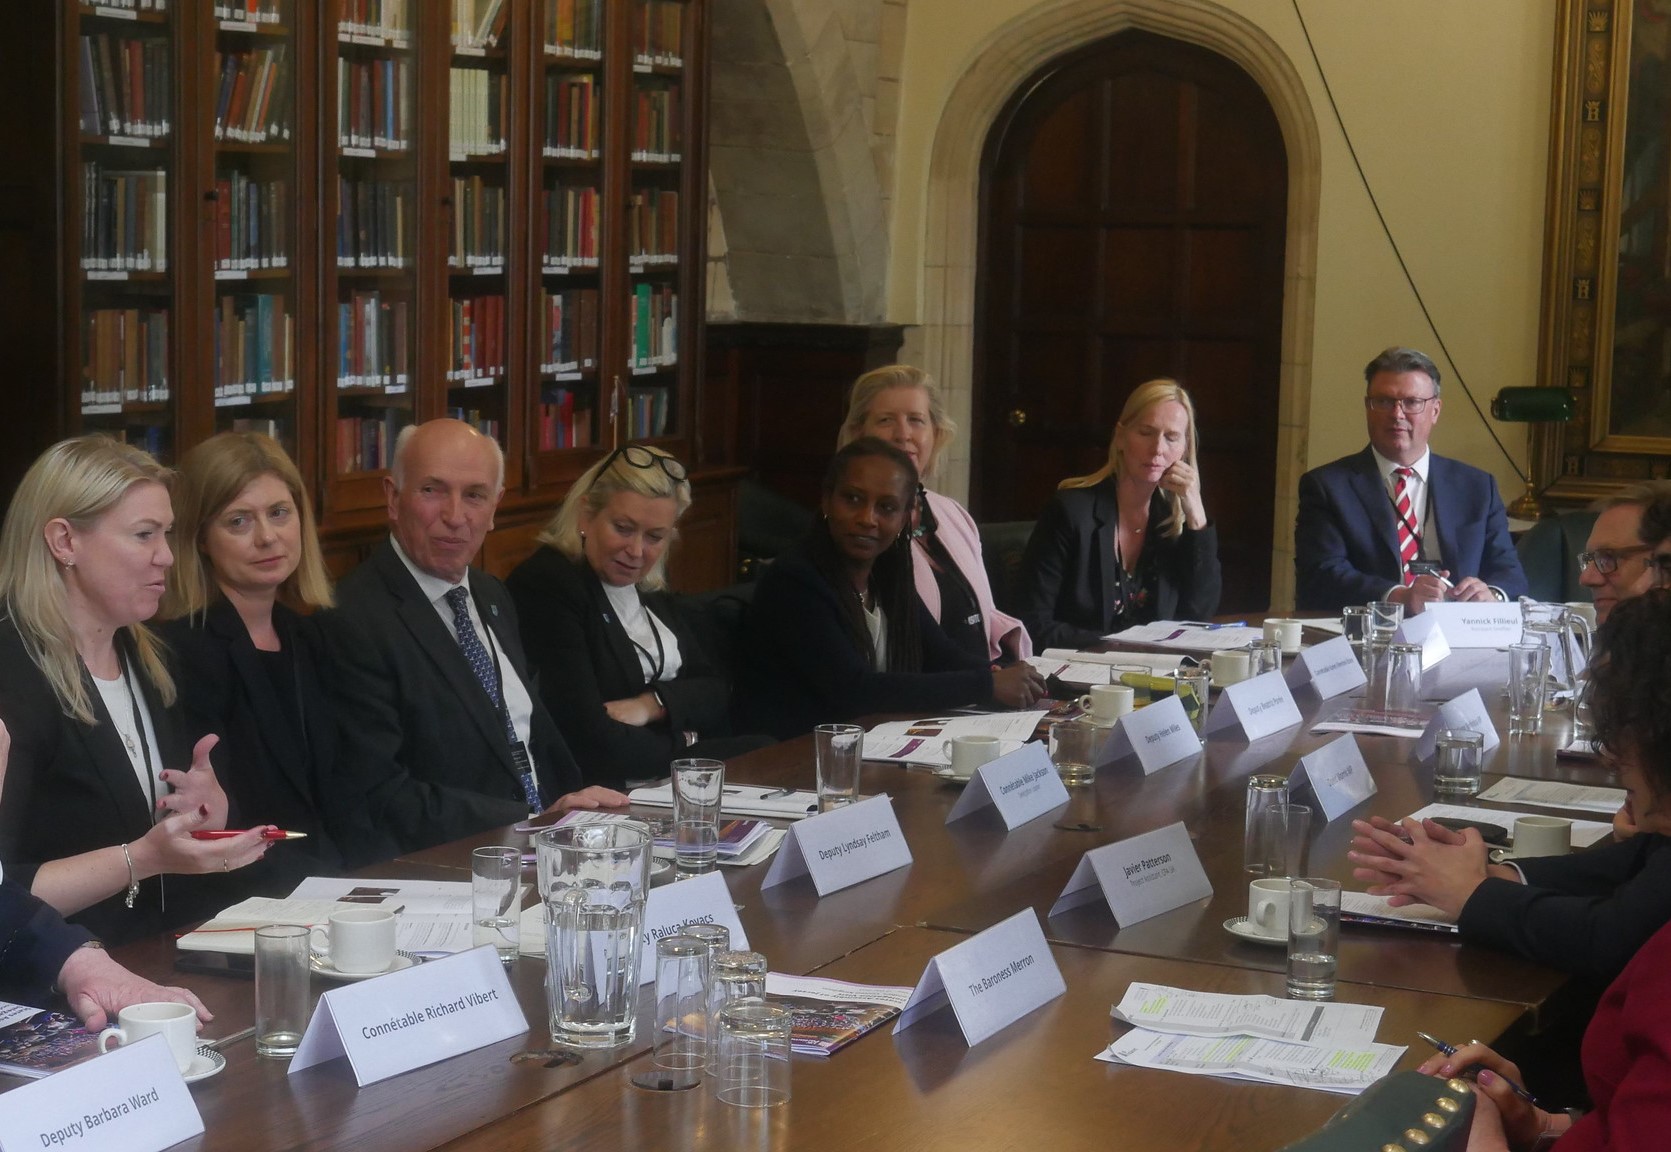 Jersey and UK Members discuss balancing the roles and responsibilities of a parliamentarian